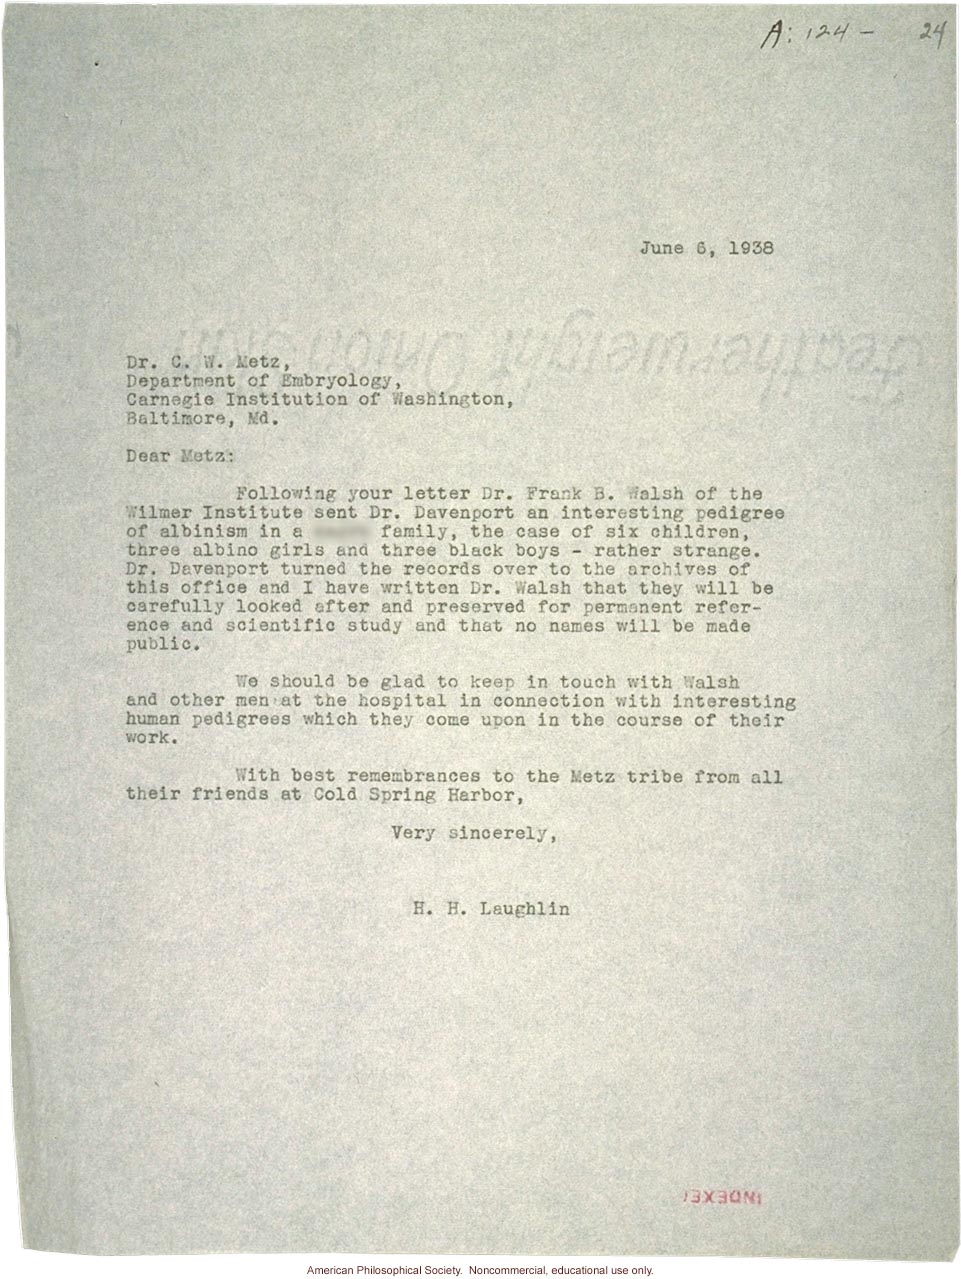 H. Laughlin letter to C. Metz, about albinism